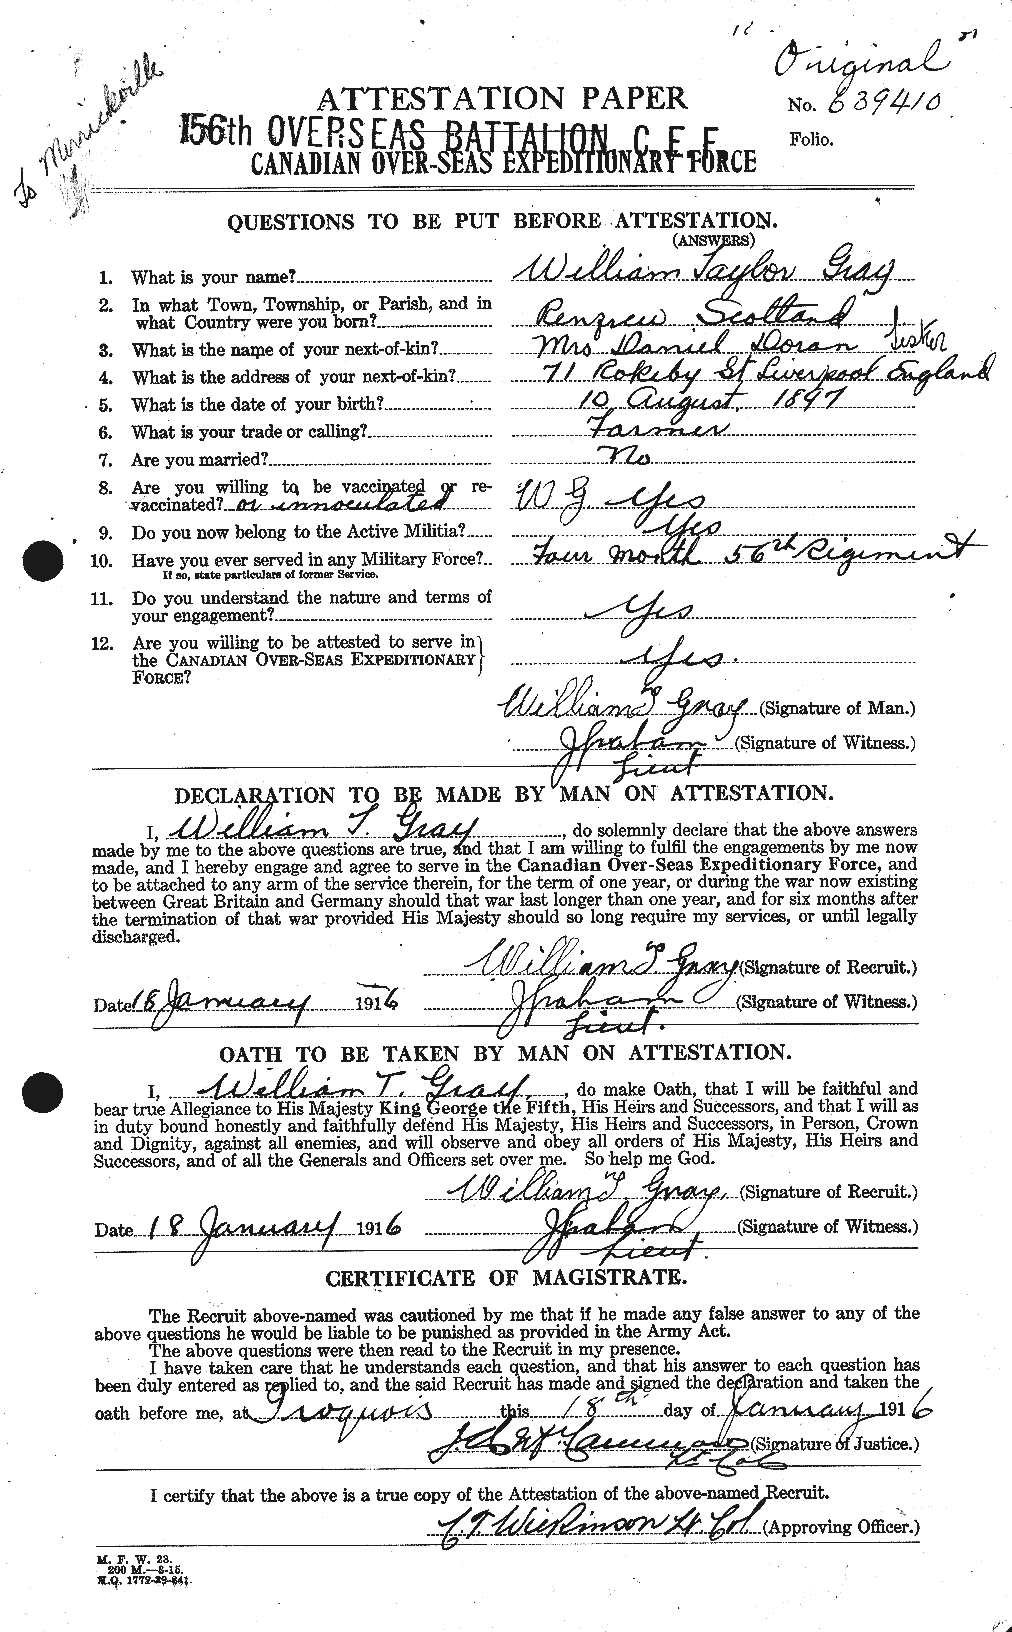 Personnel Records of the First World War - CEF 361856a